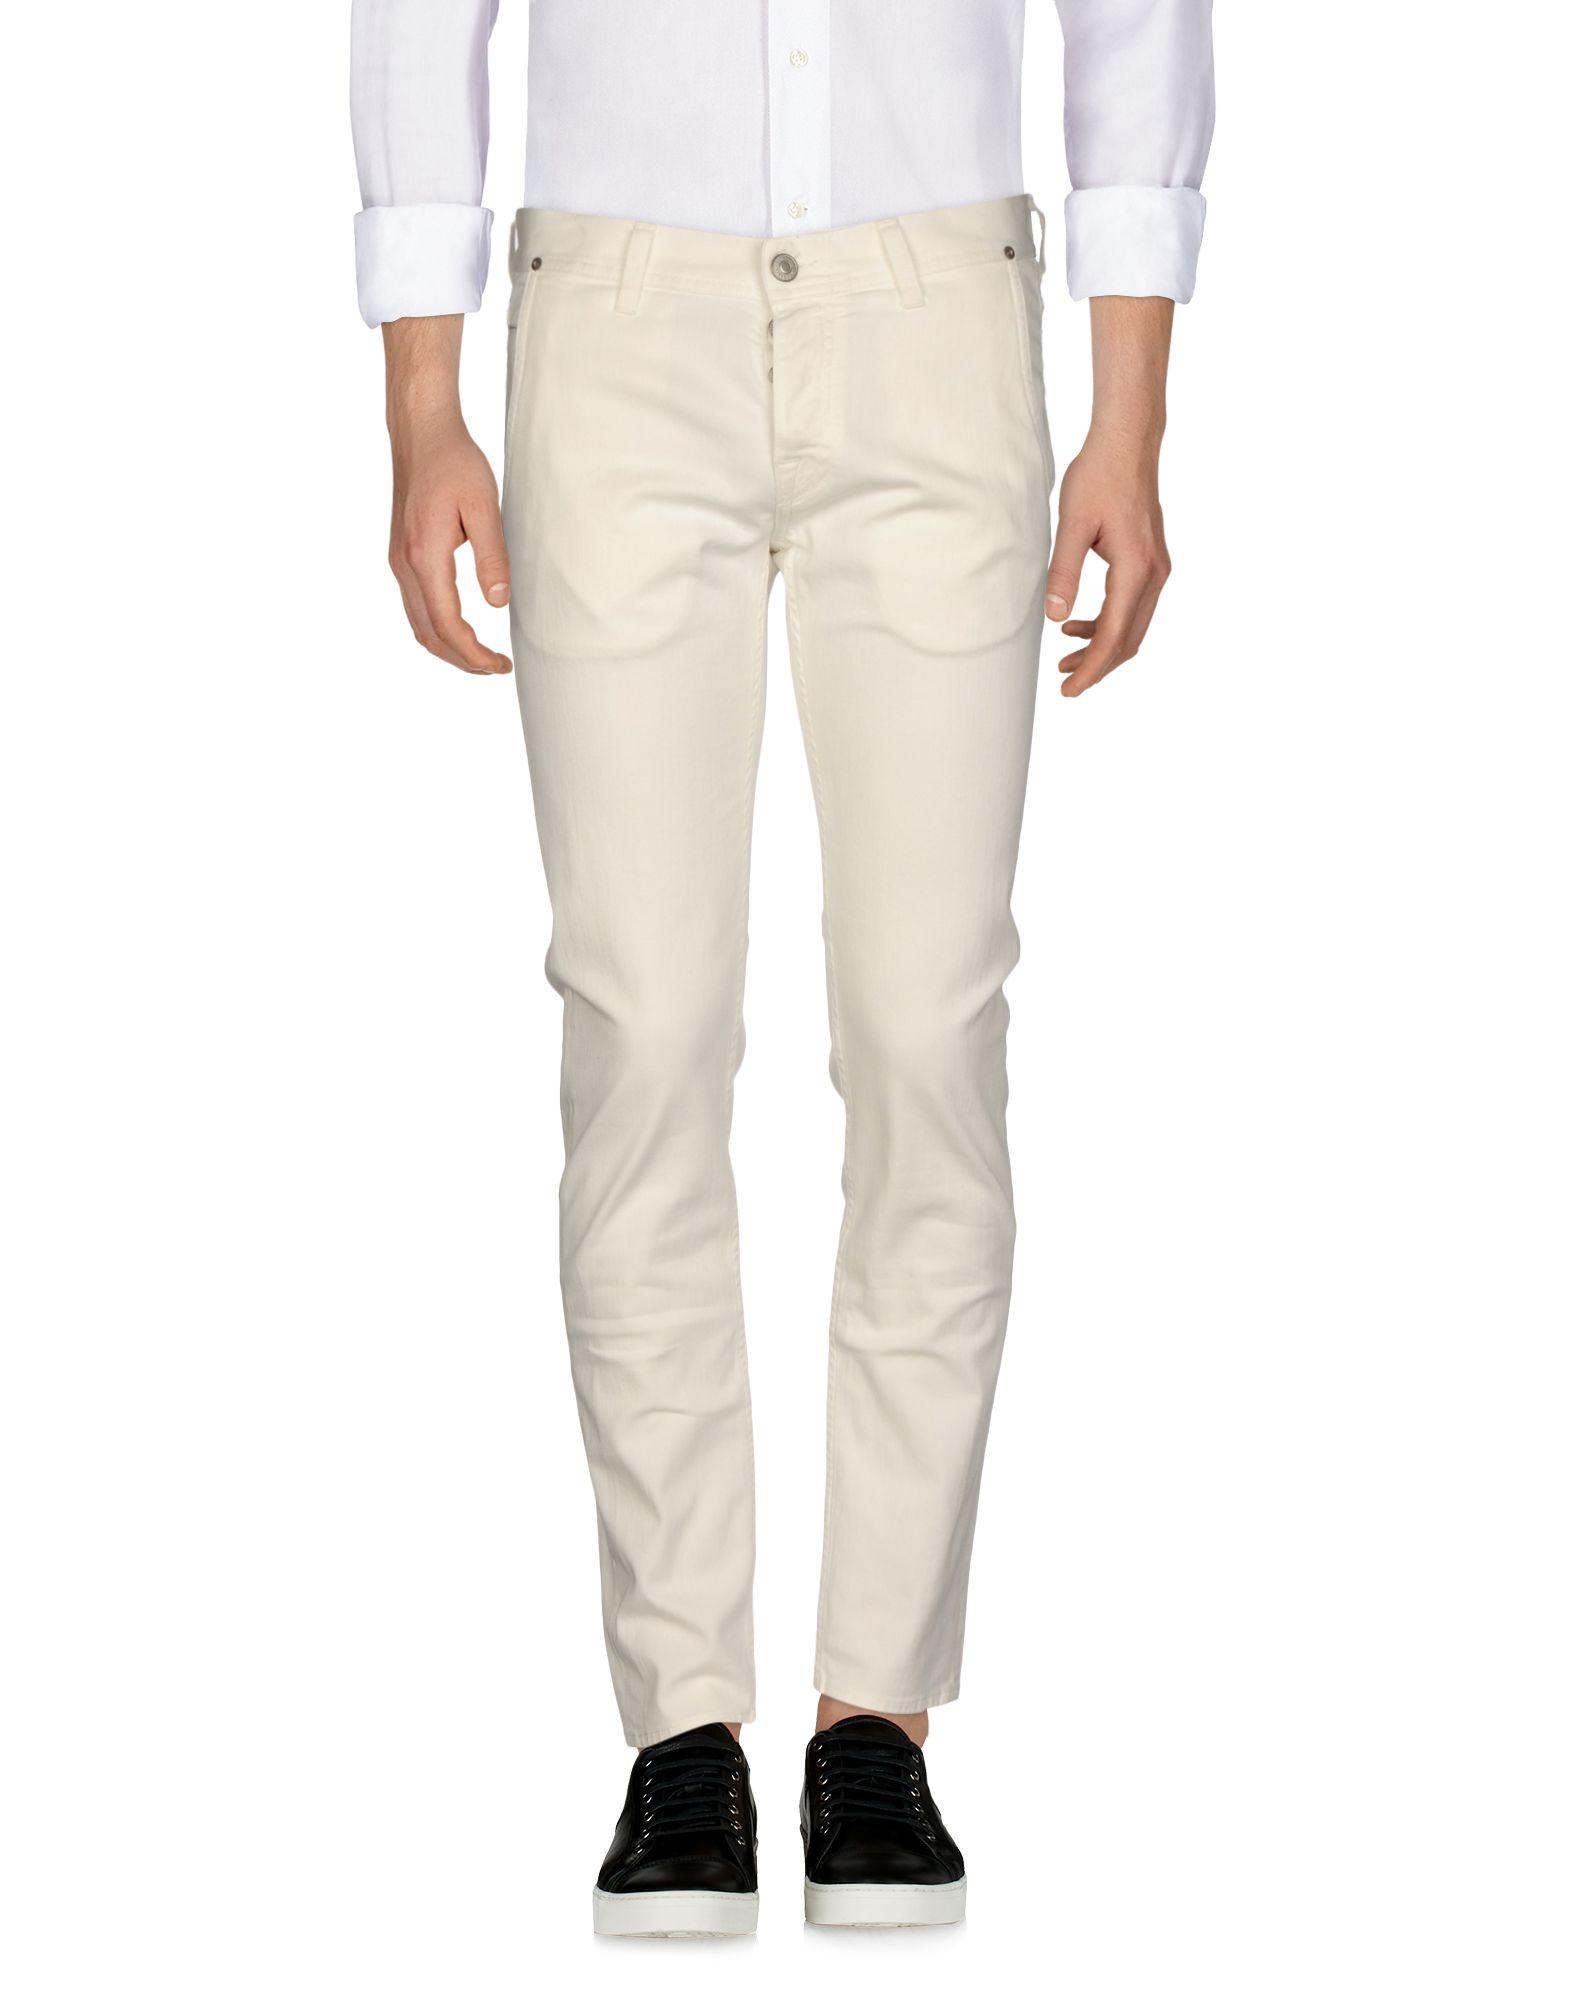 Care Label Jeans In White | ModeSens